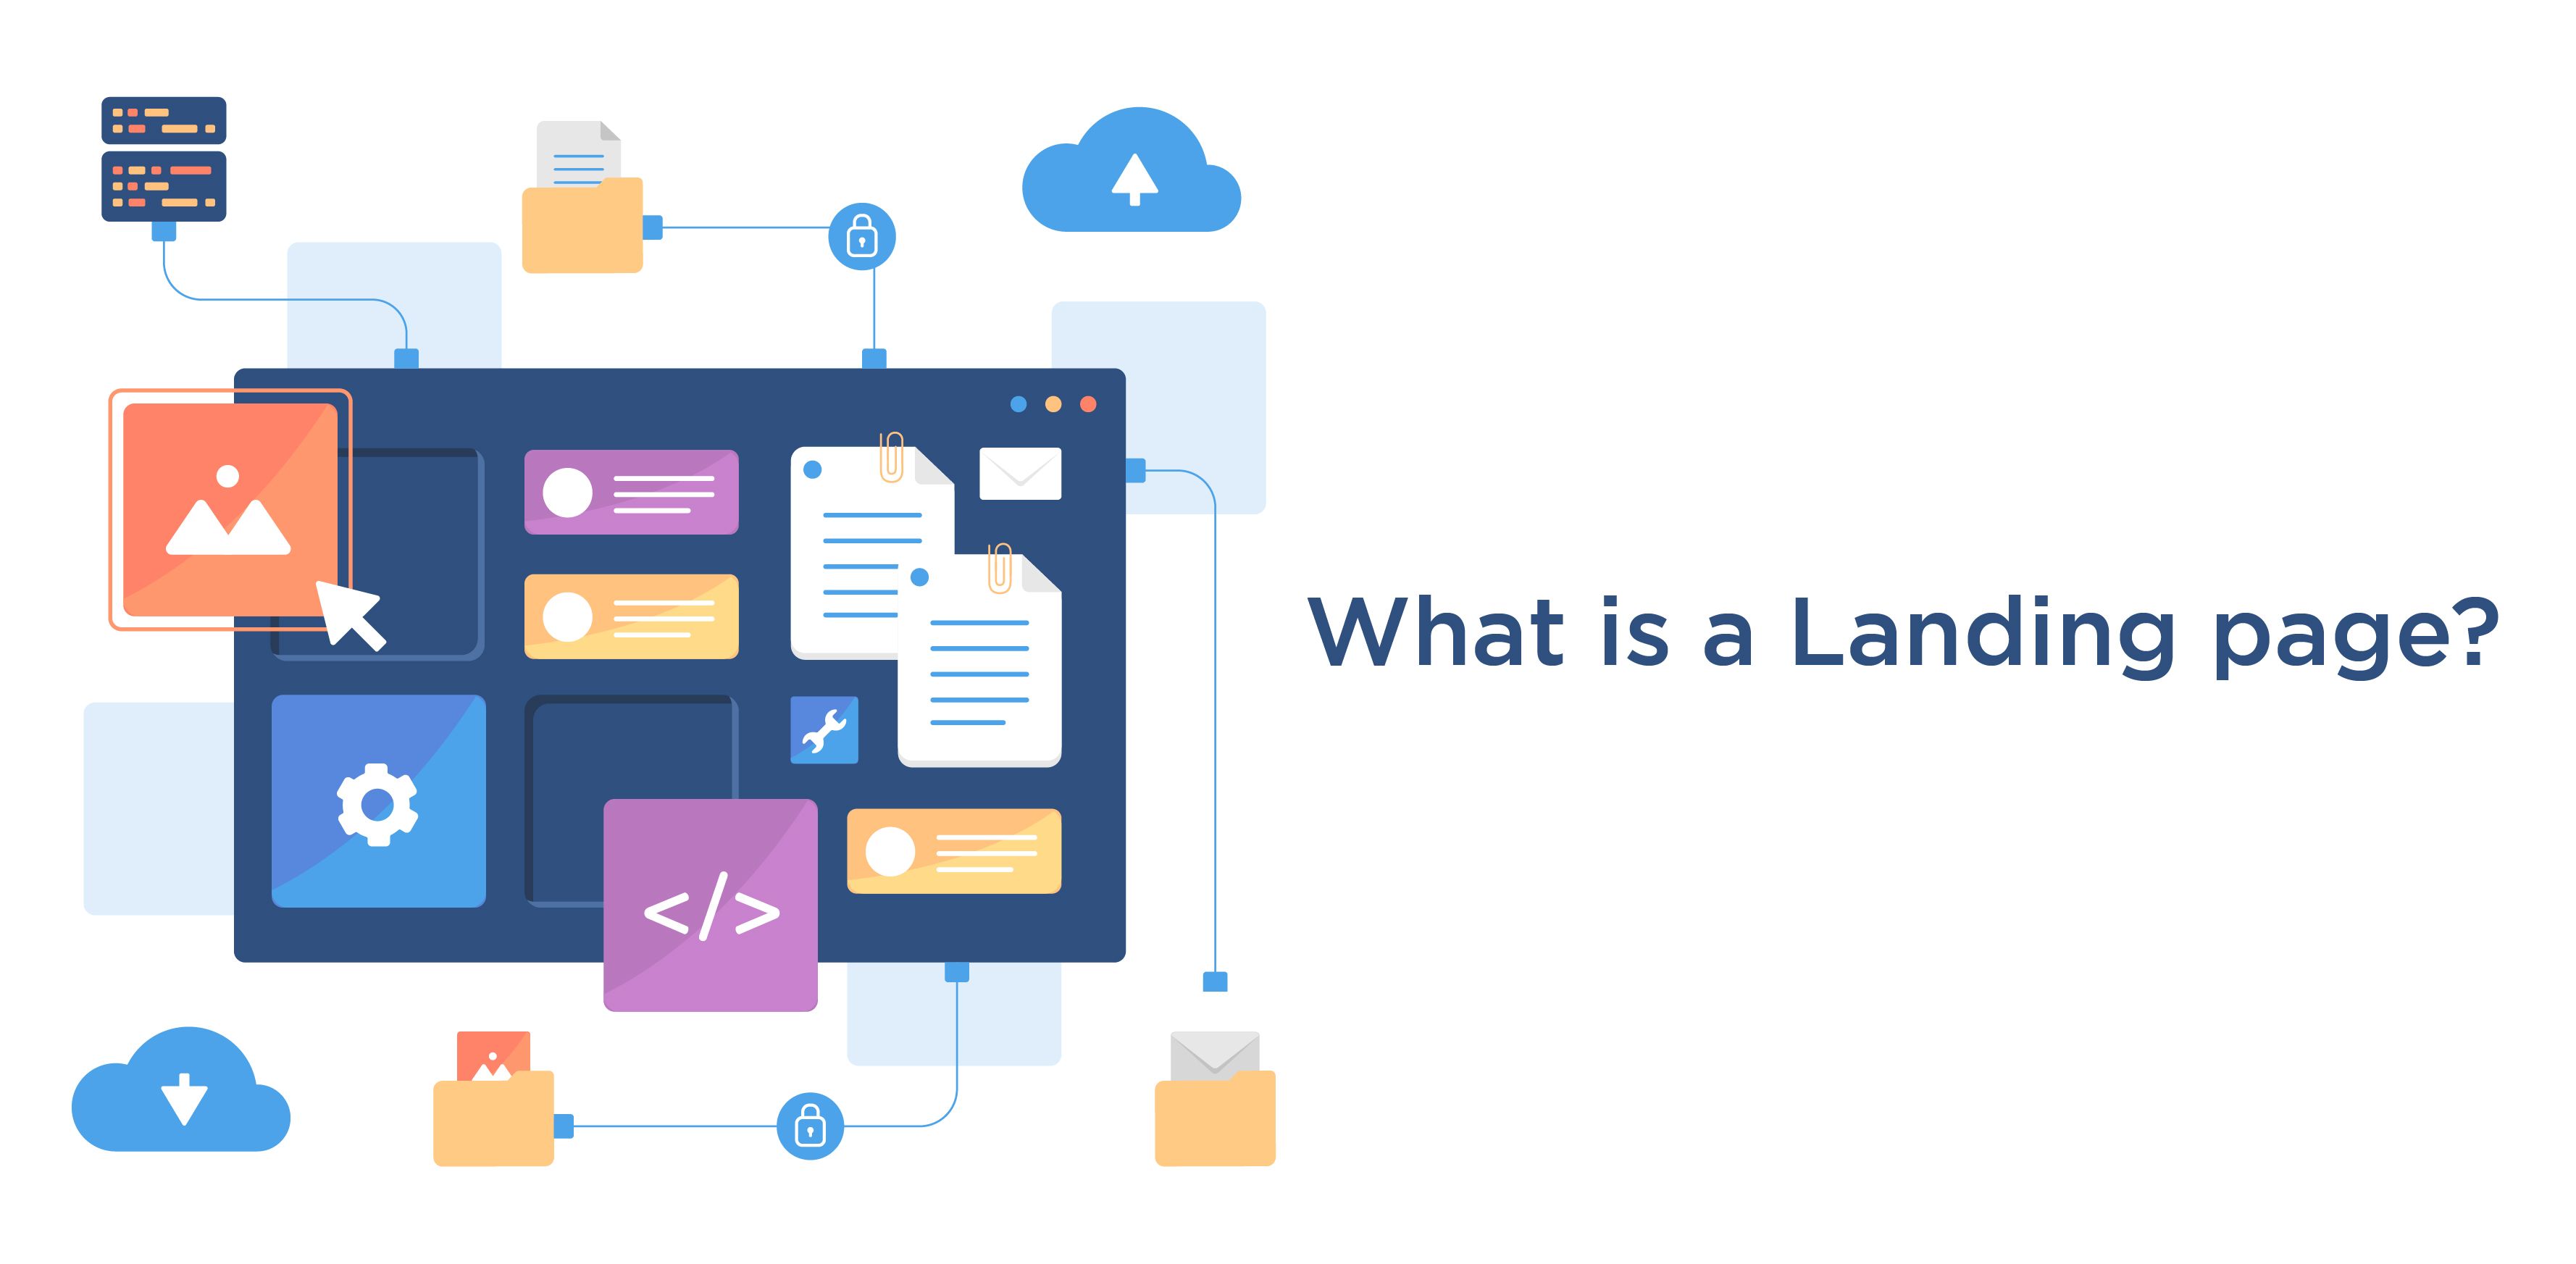 What is a Landing page?